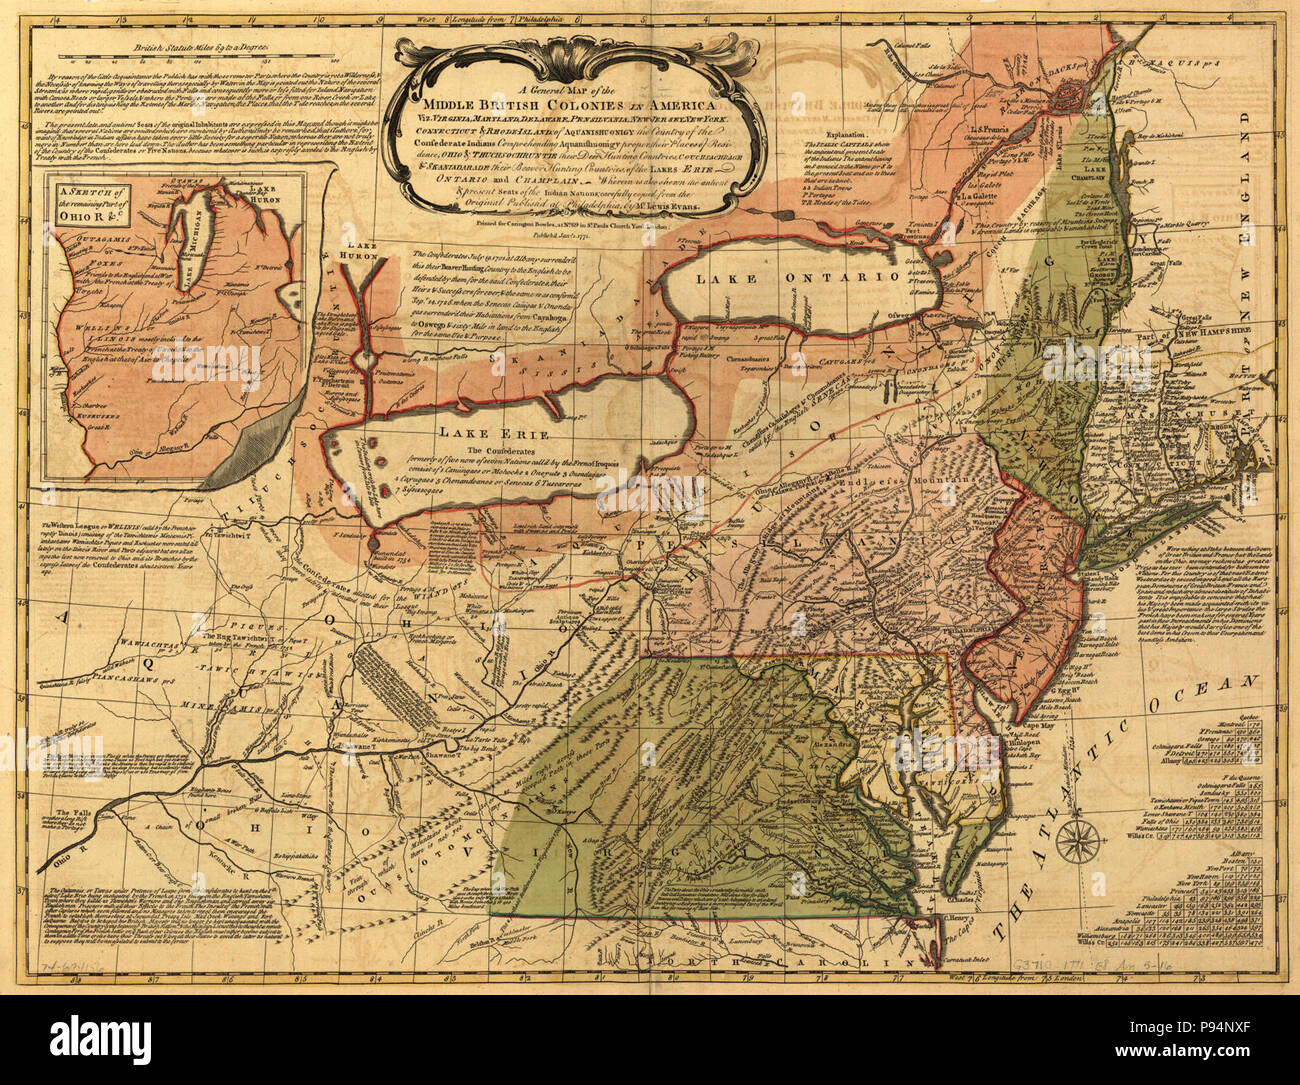 A general map of the middle British colonies in America, viz. Virginia, Maryland, Delaware, Pensilvania, New-Jersey, New York, Connecticut & Rhode-Island- Of Aquanishuonigy the country of the Stock Photo